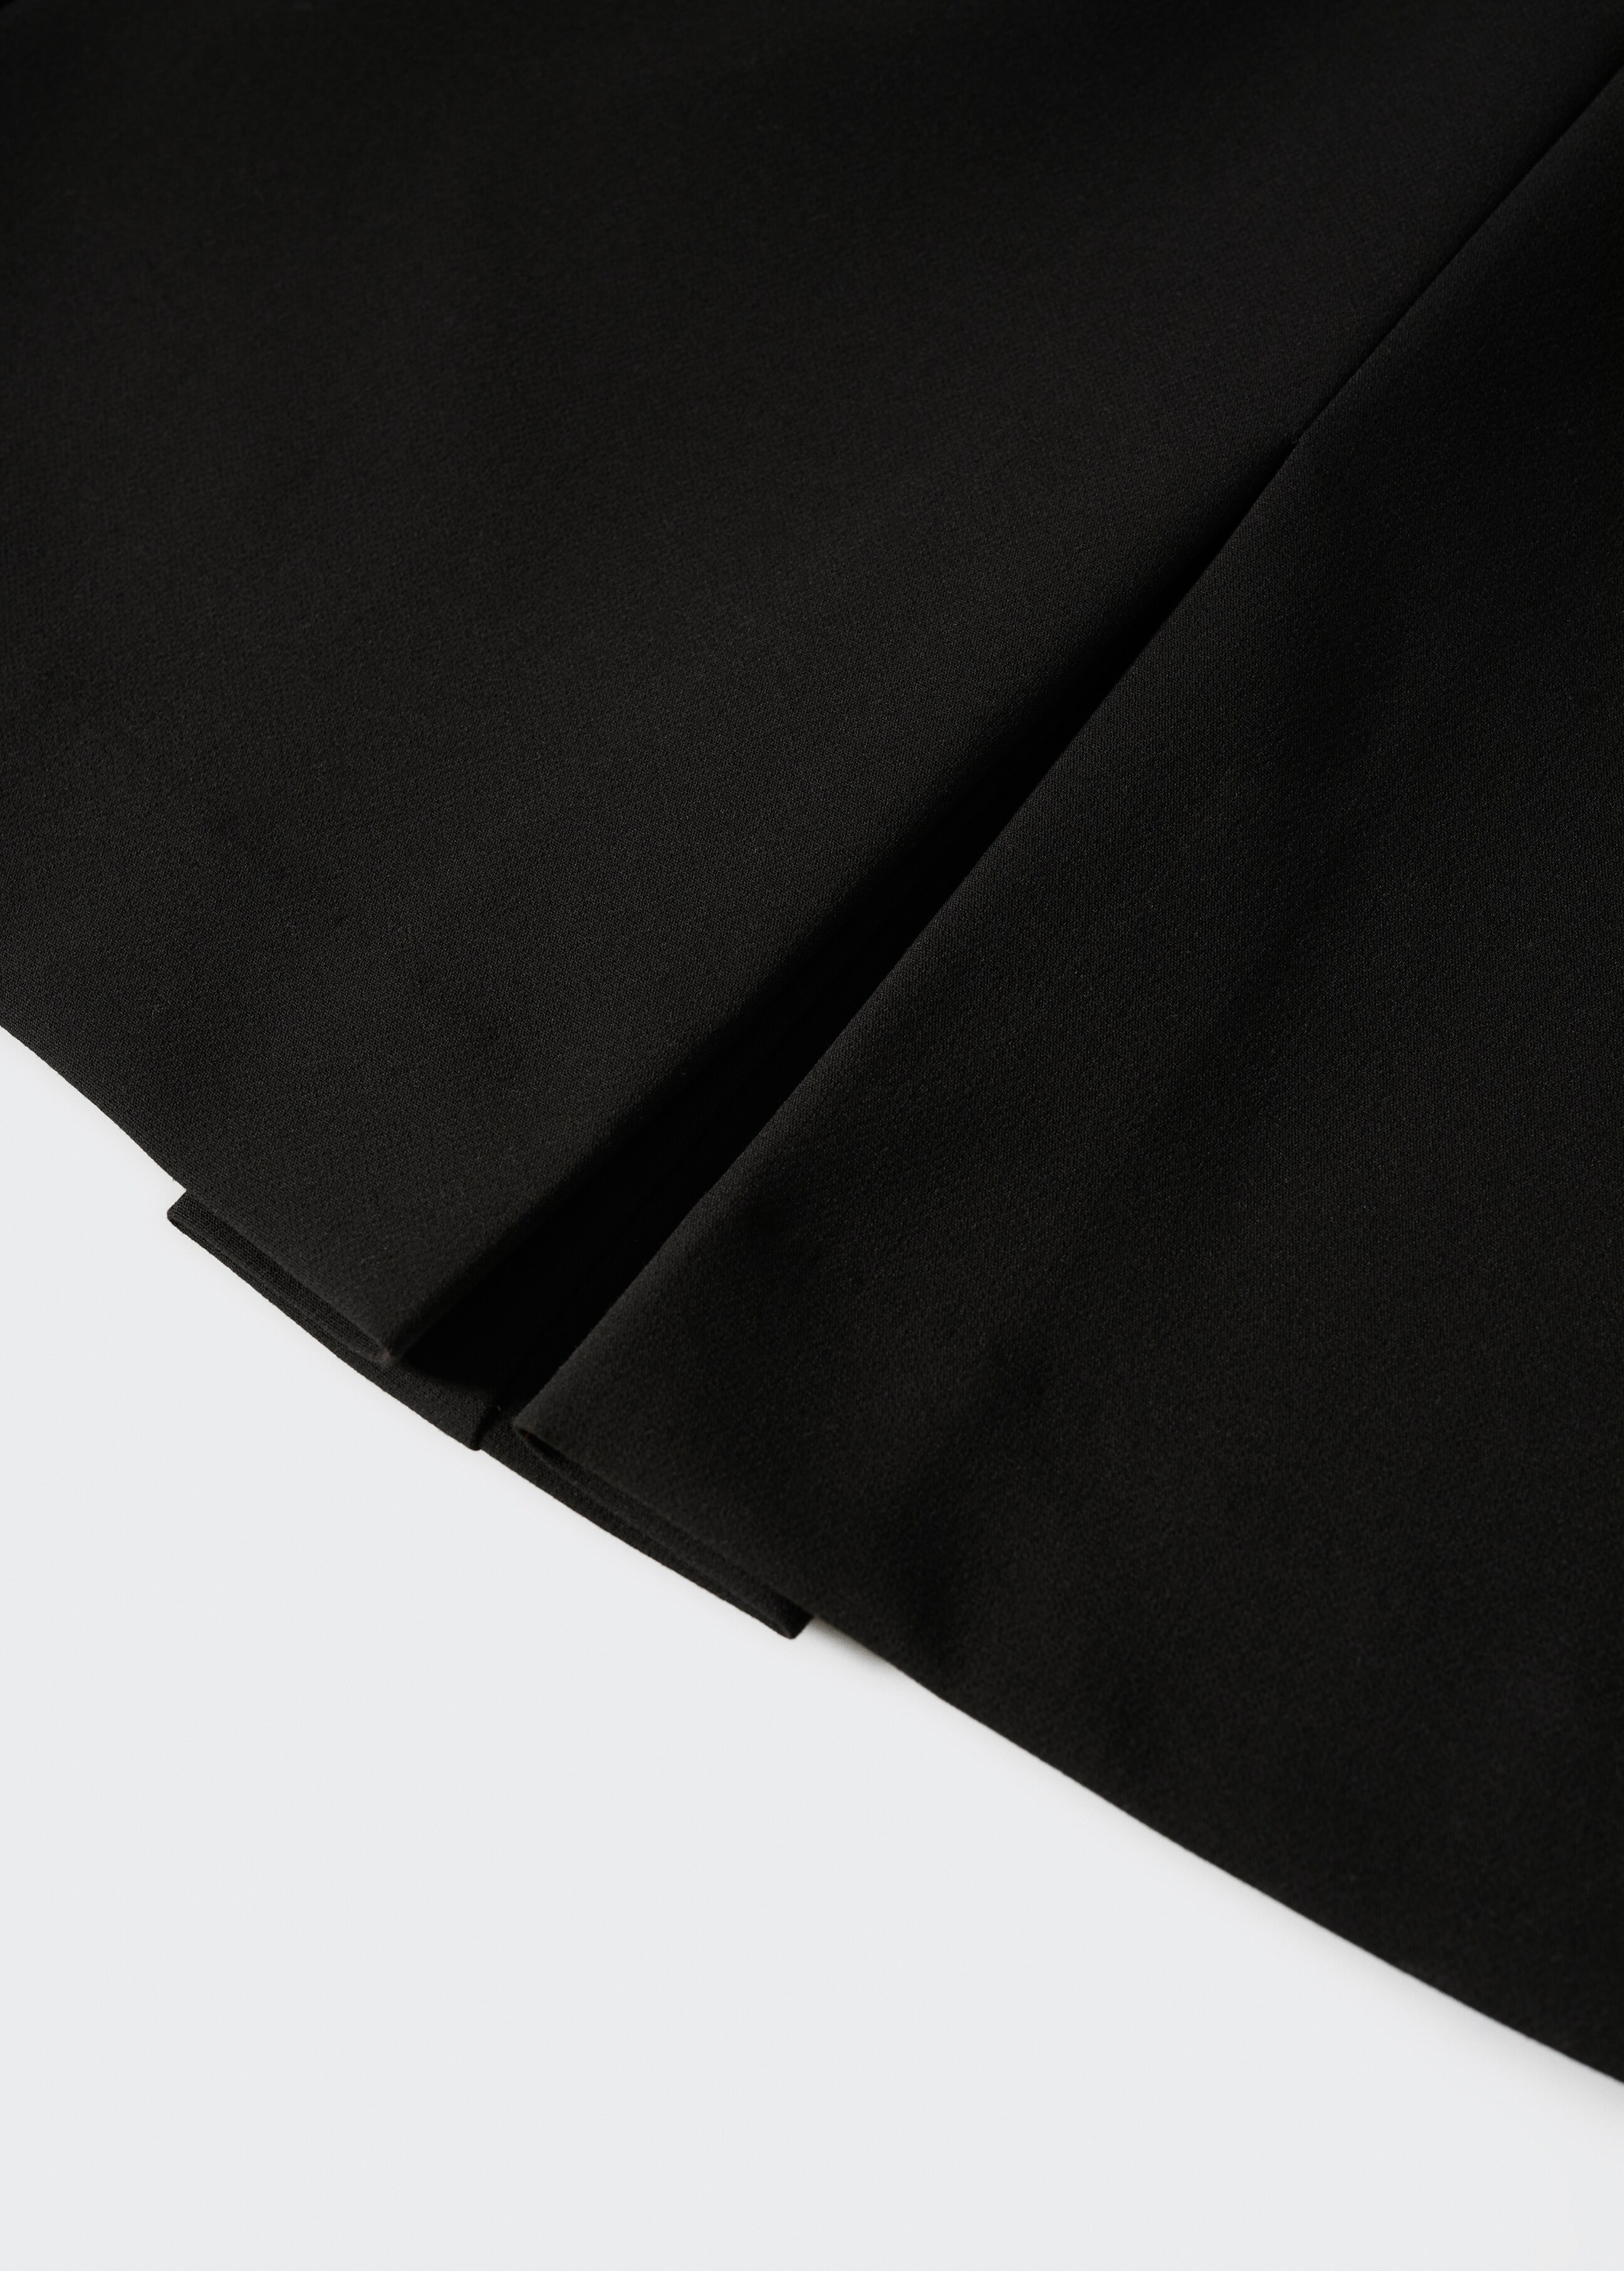 Pleated skirt detail - Details of the article 8